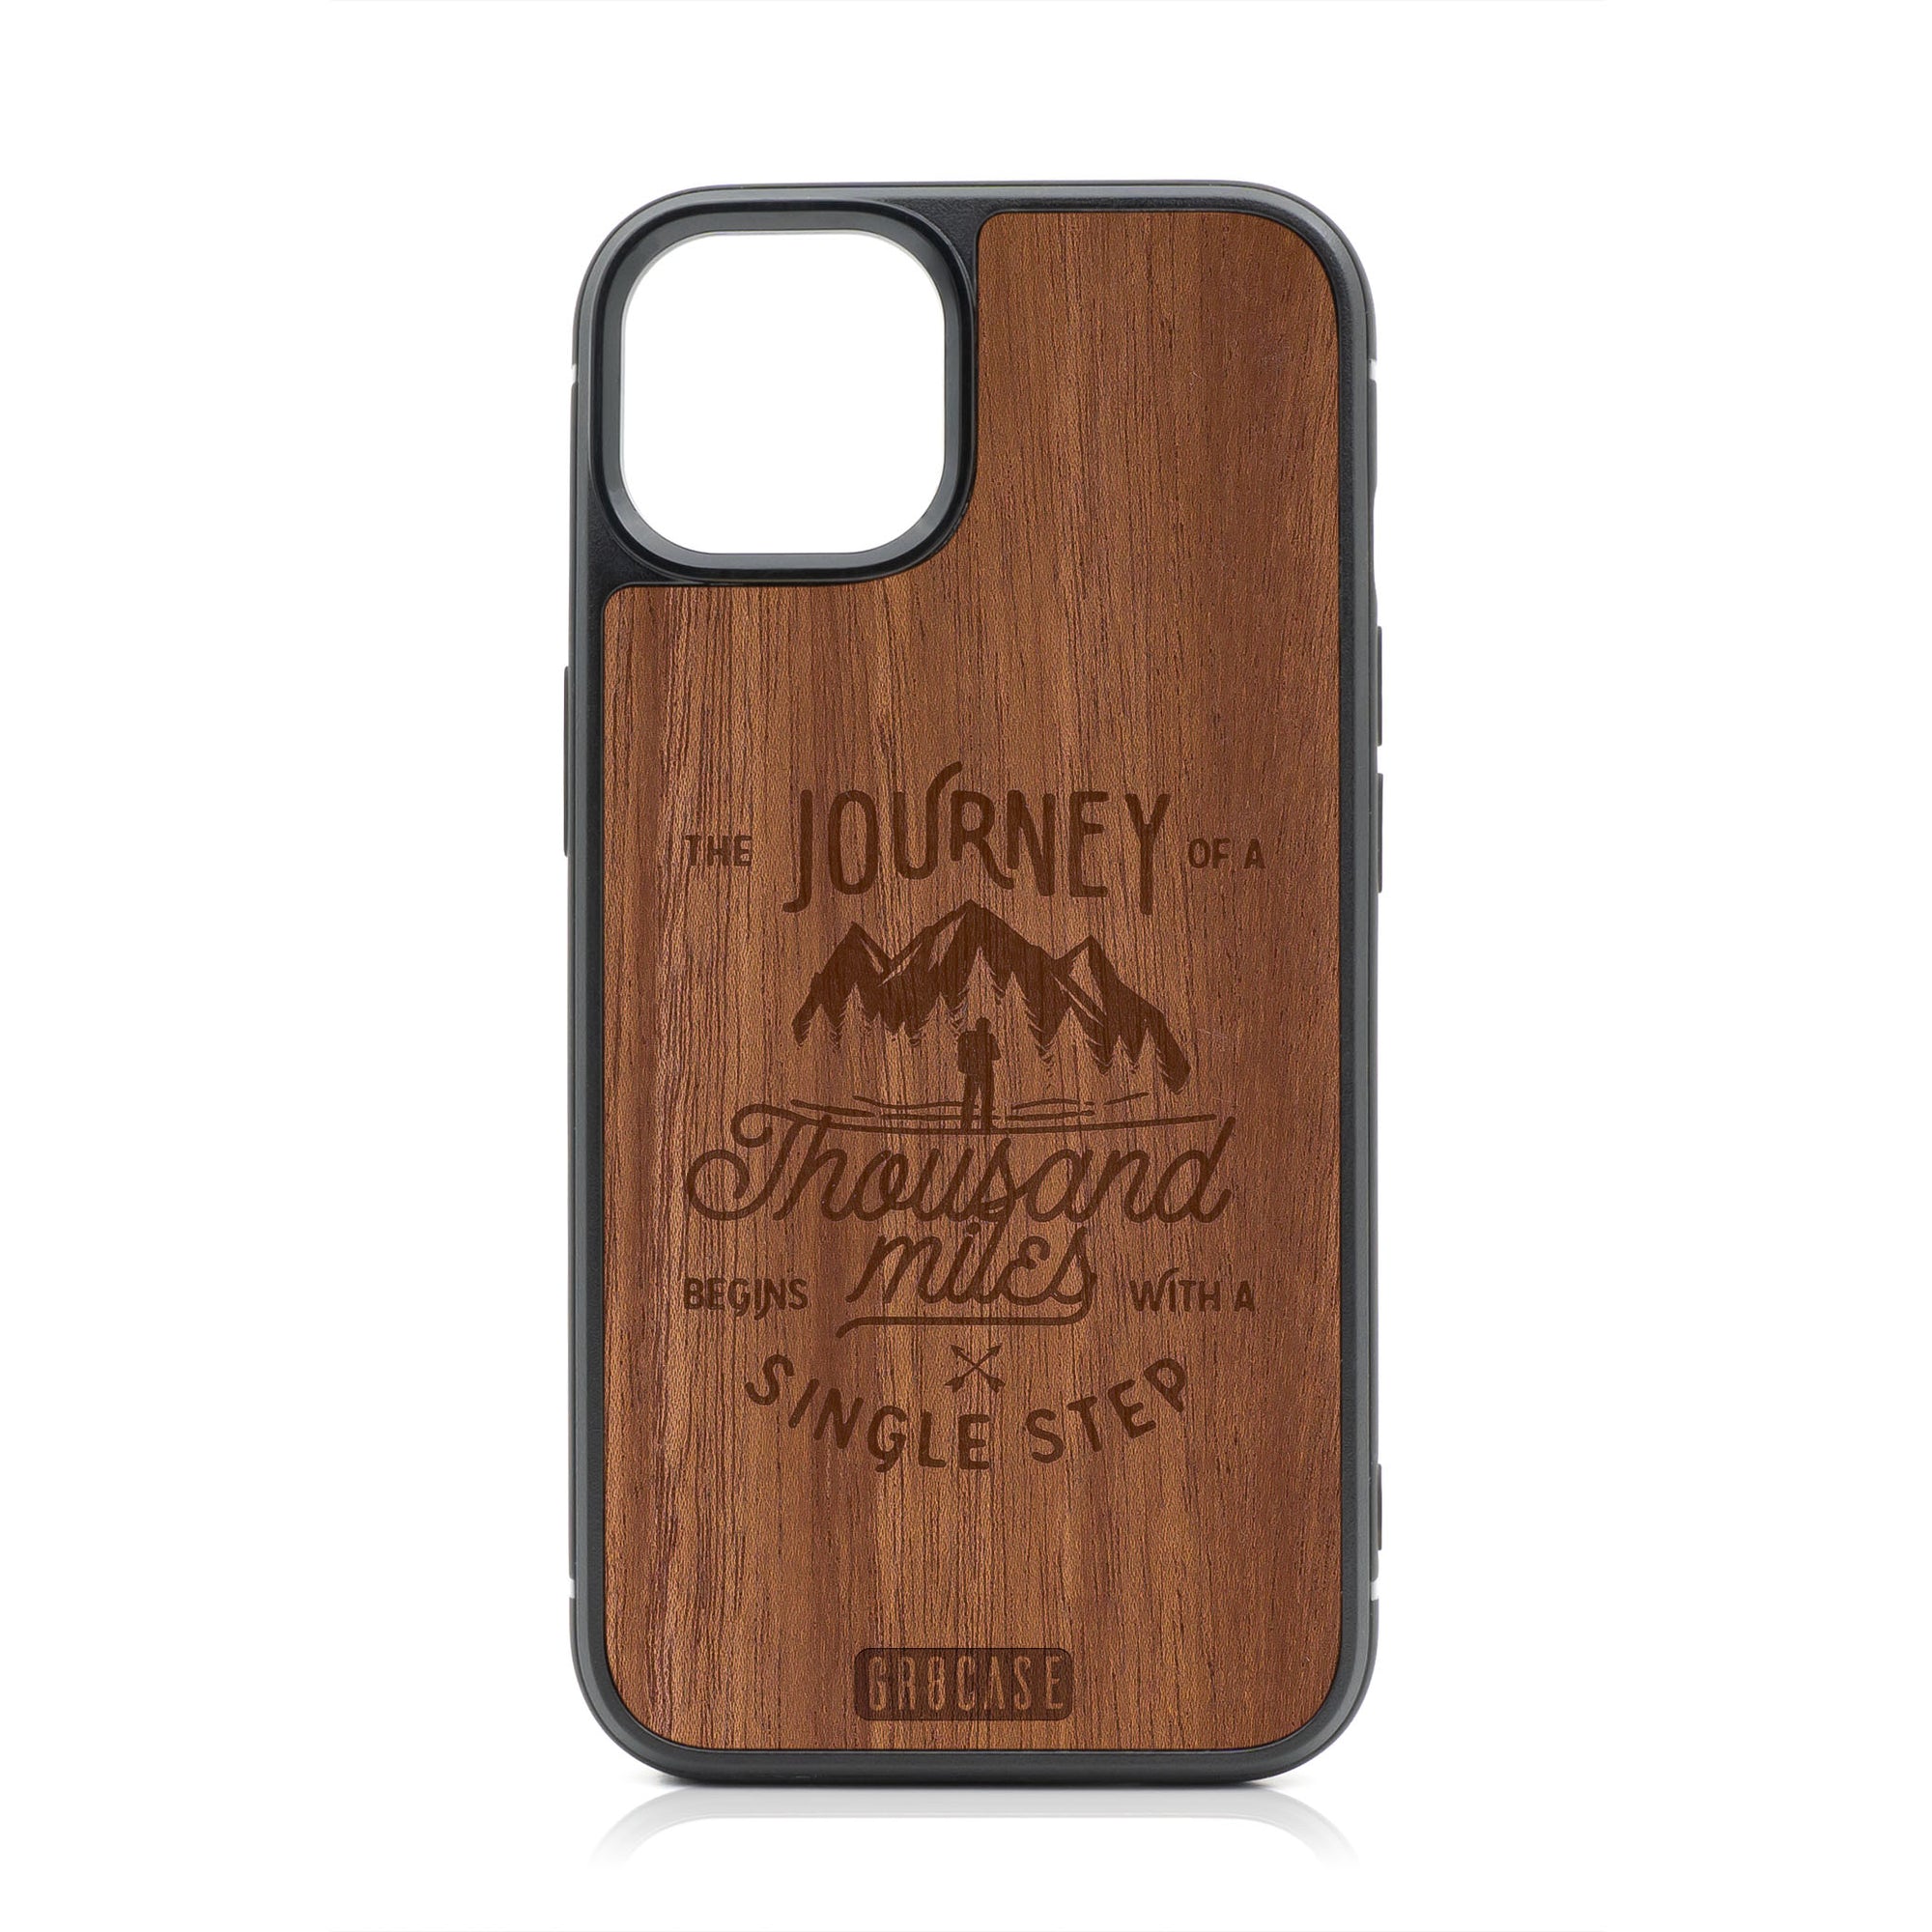 The Journey of A Thousand Miles Begins With A Single Step Design Wood Case For iPhone 13